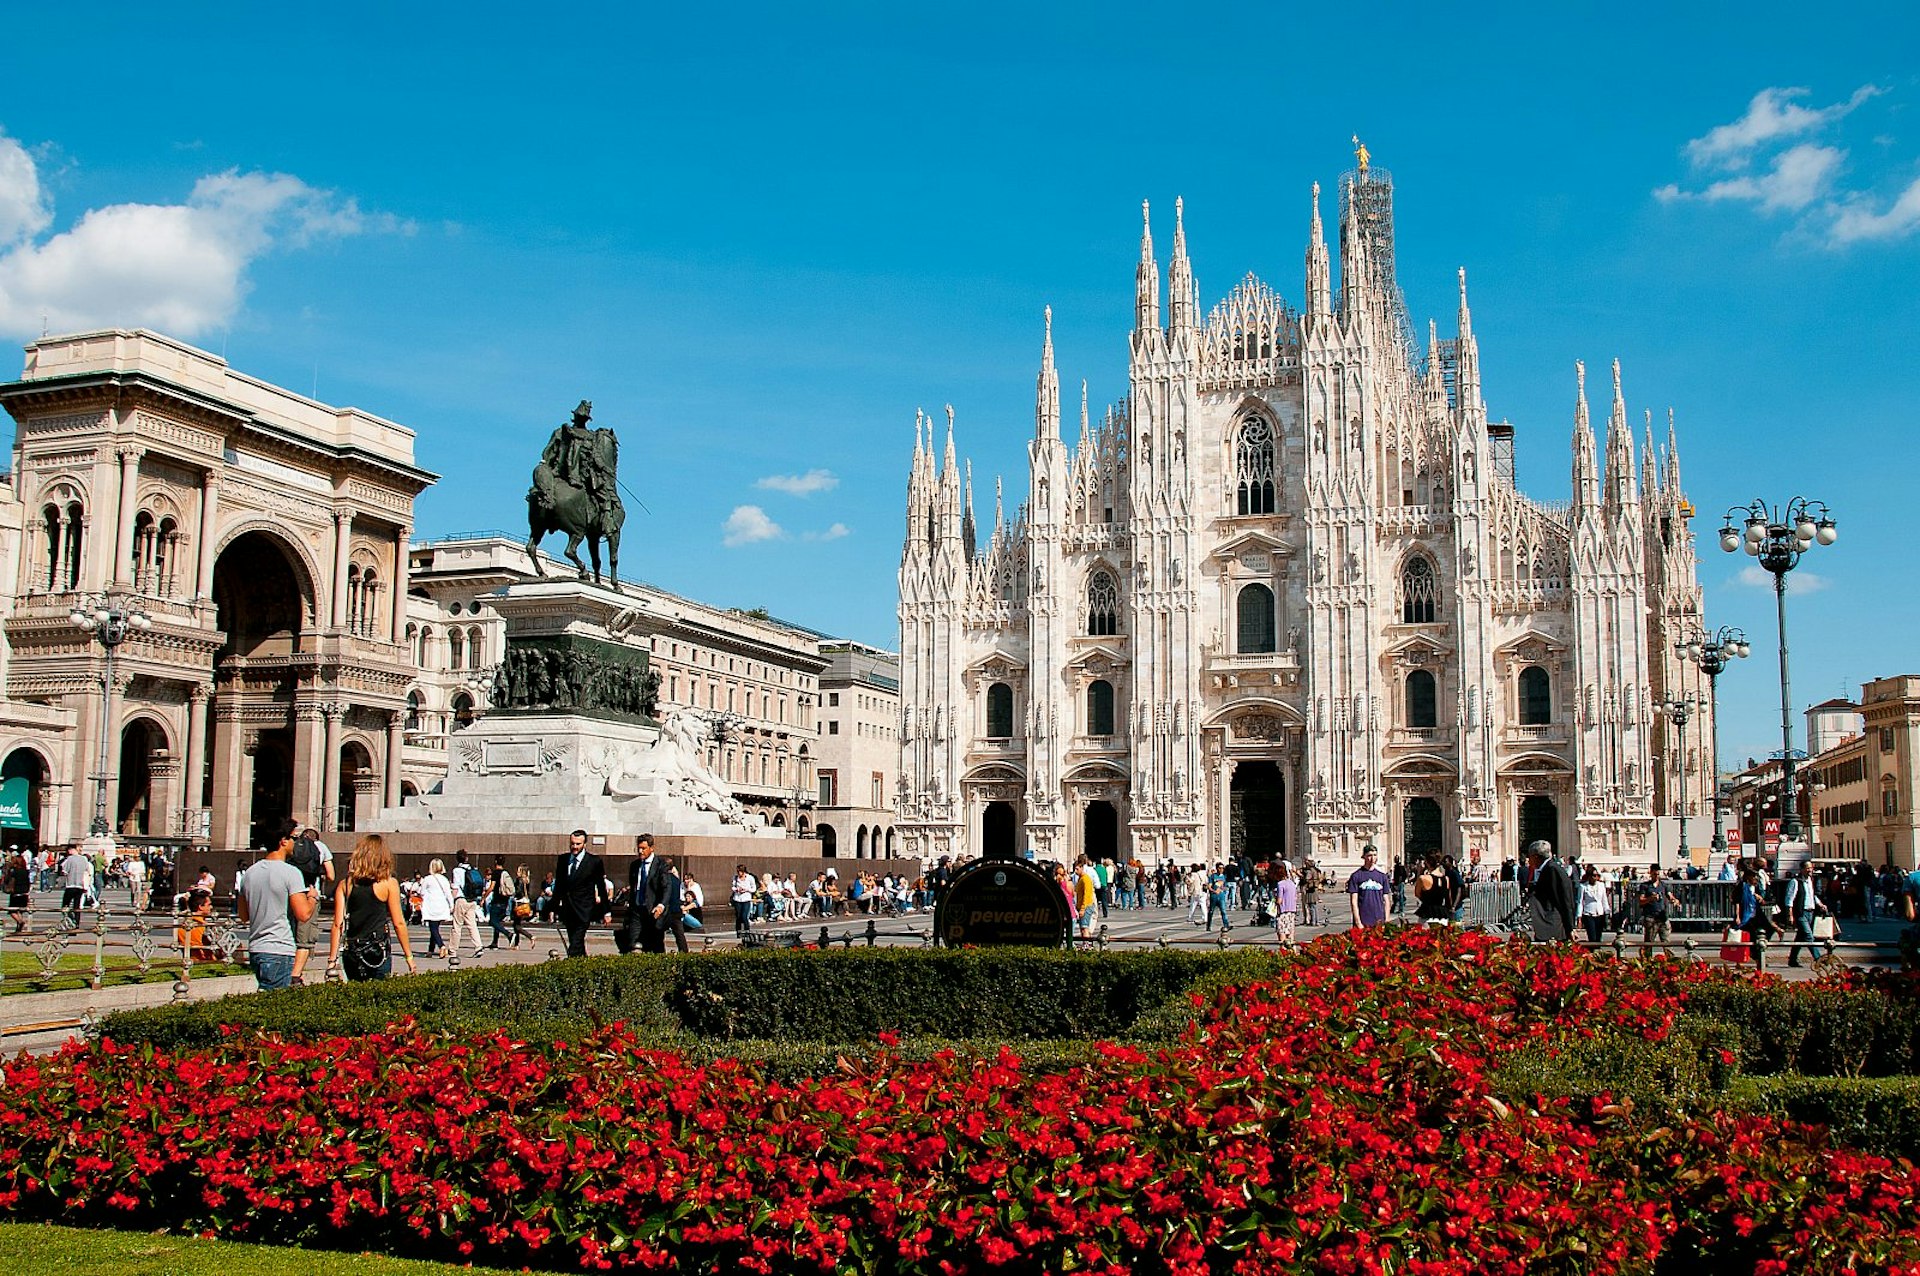 A red-flowering hedge in front of Milan's Duomo, a Gothic cathedral with a pearly white facade, extravagantly adorned with many spires and statues; there is a statue of a man on a horse to the side, and a large arch to the left.